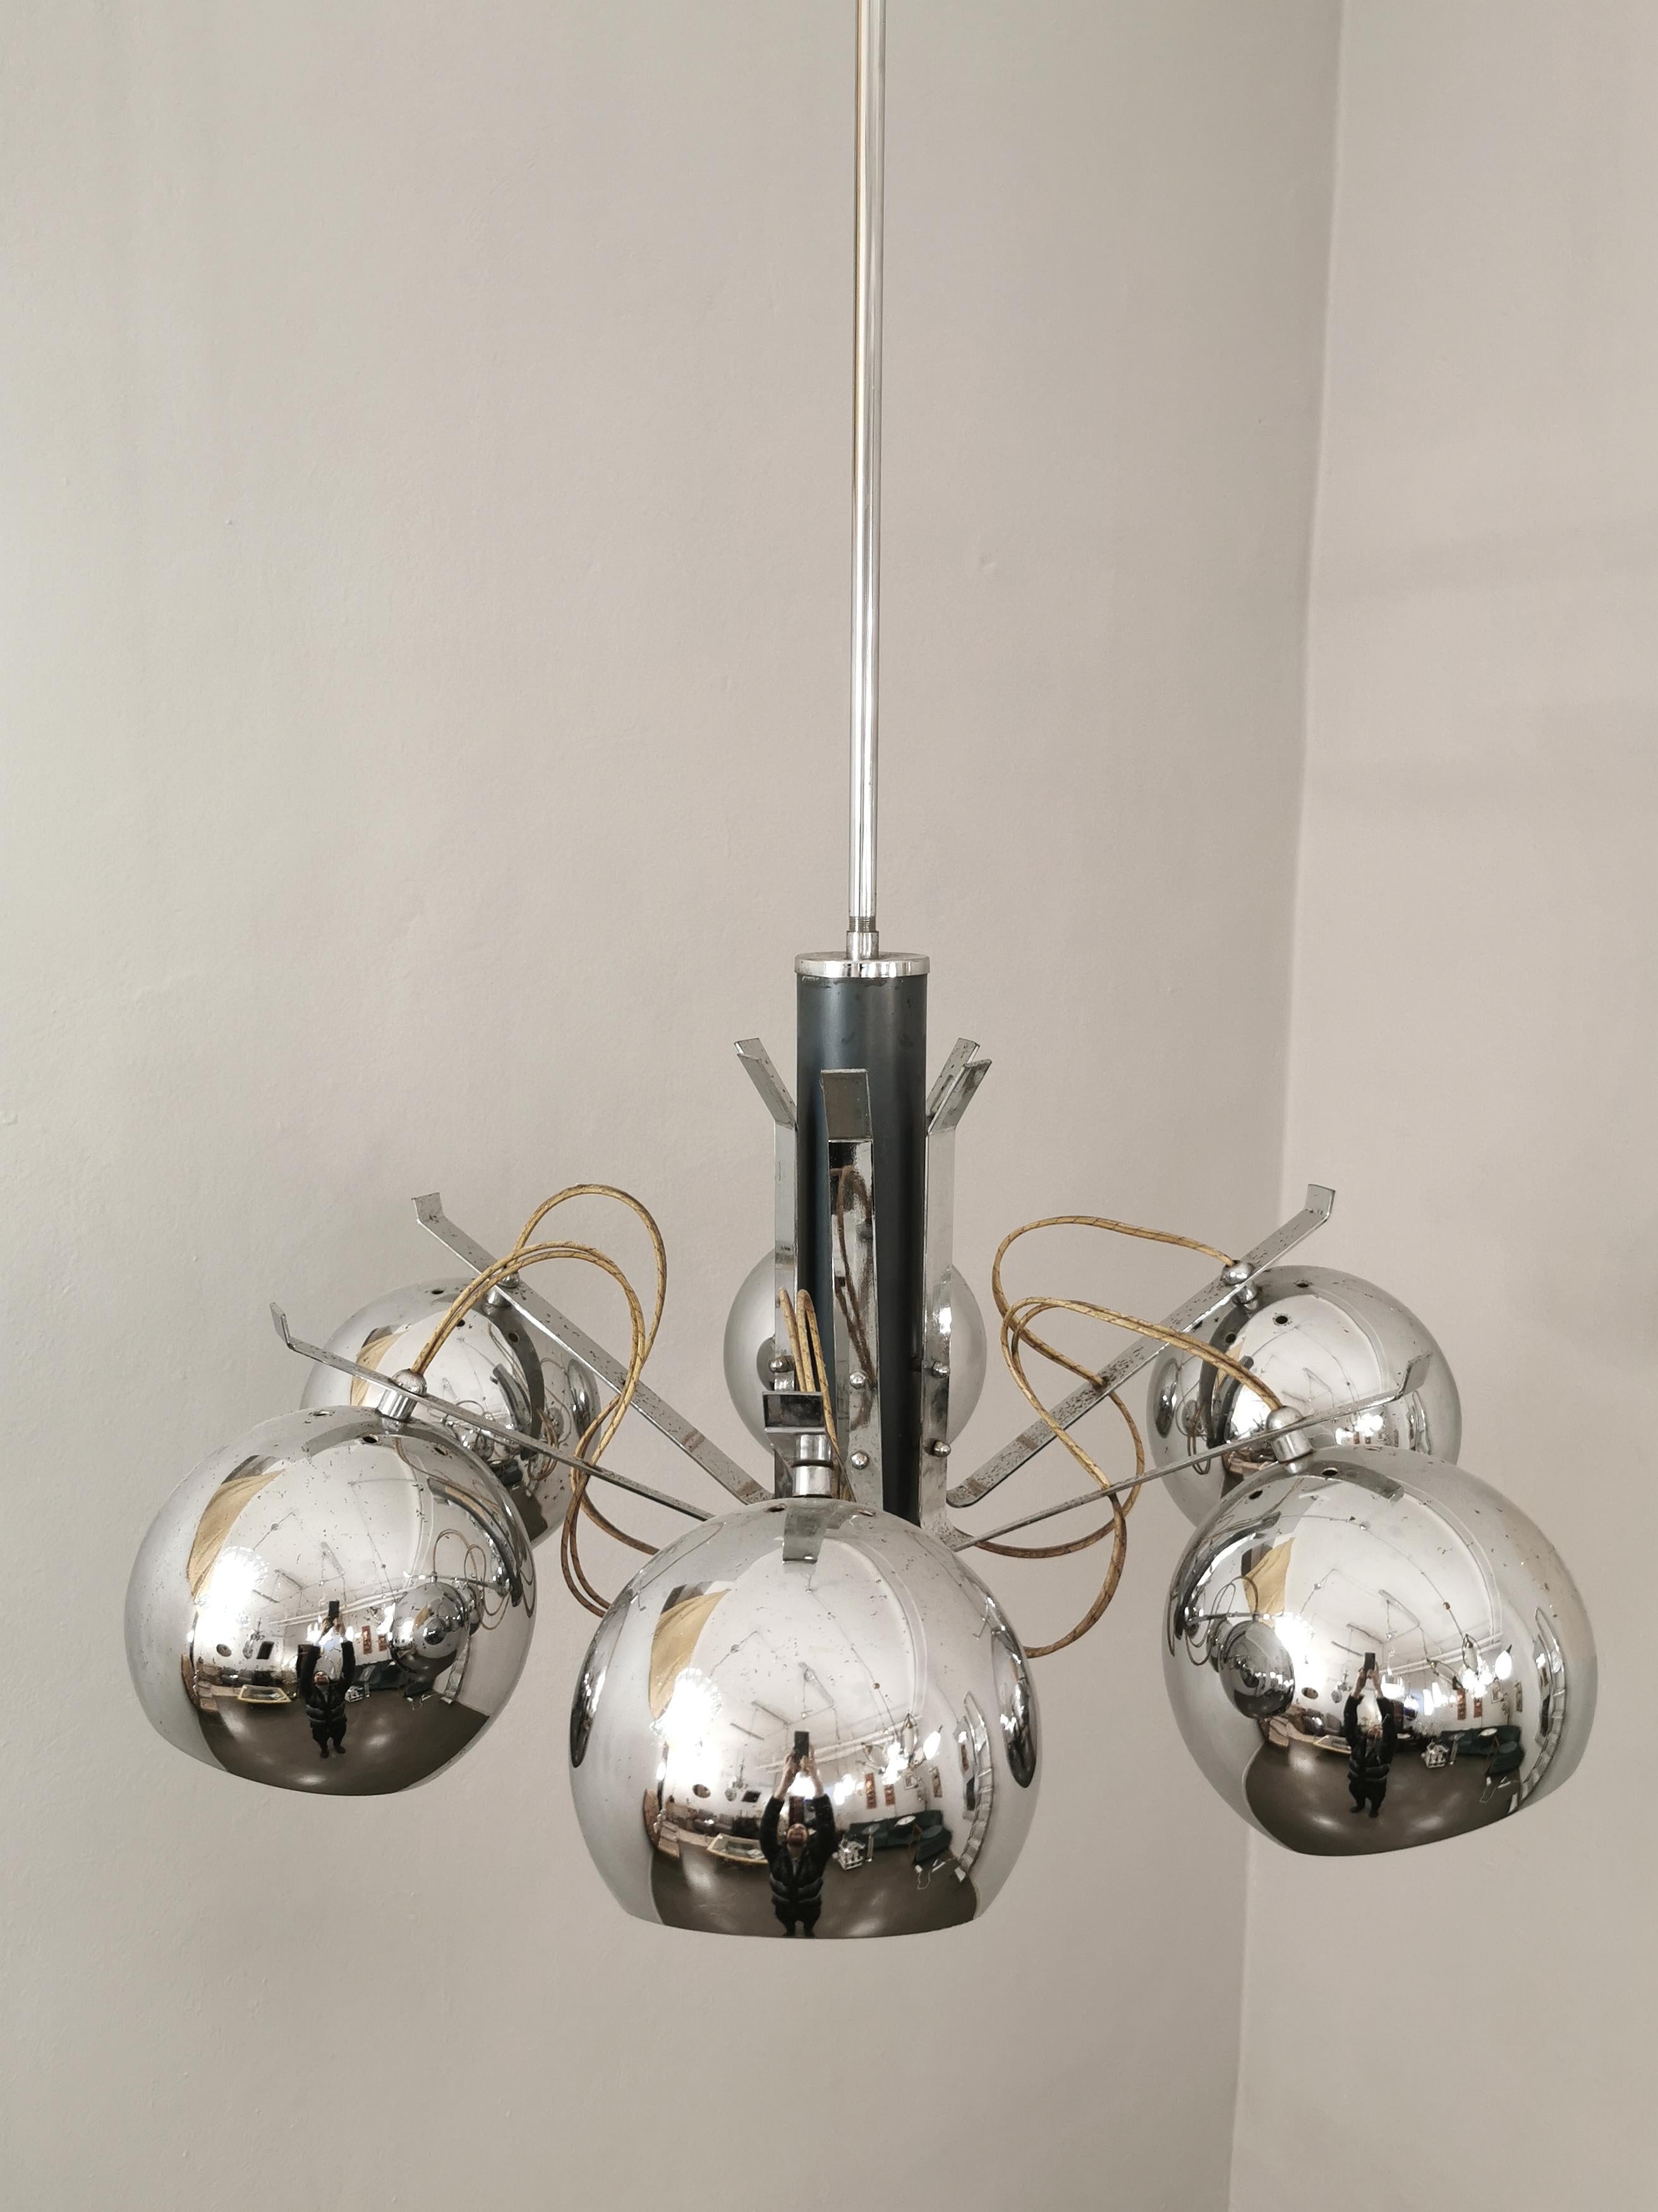 Chandelier by the unknown designer with a long stem that supports 6 circular diffusers in chromed metal with 6 E27 lights. Made in Italy in the 70s.